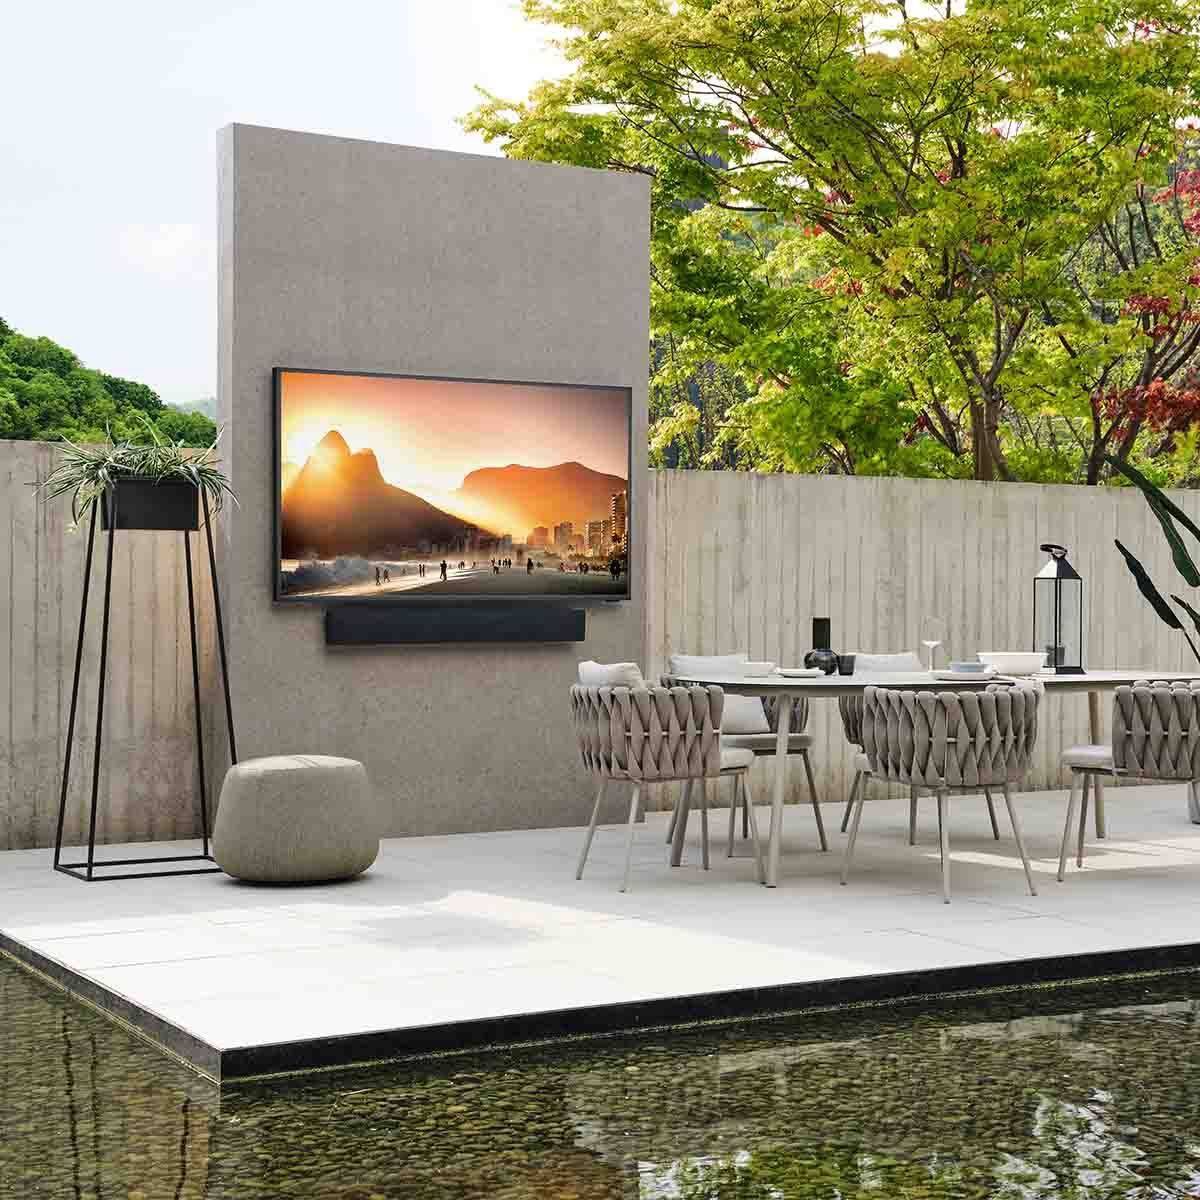 Samsung The Terrace Outdoor QLED 4K HDR Smart TV - Full Sun LST9T - lifestyle image